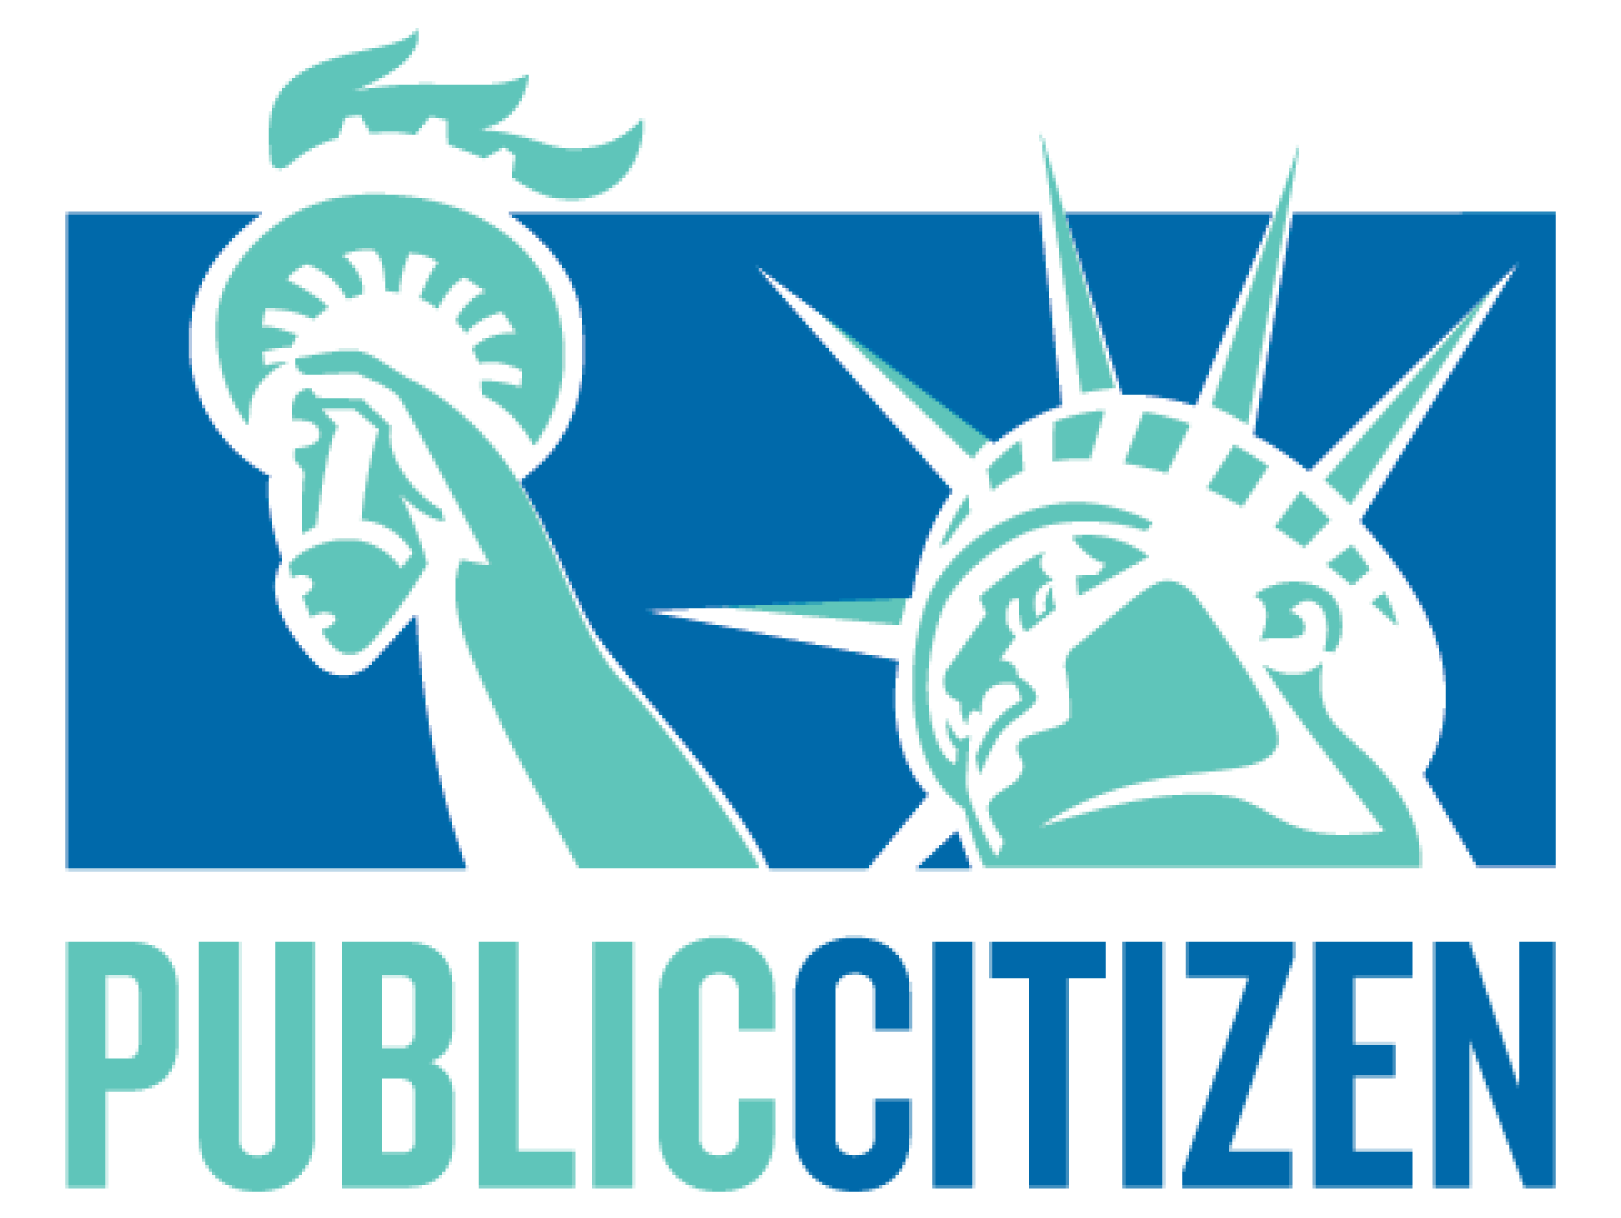 Logo for Public Citizen showing the Statue of Liberty above the organization name